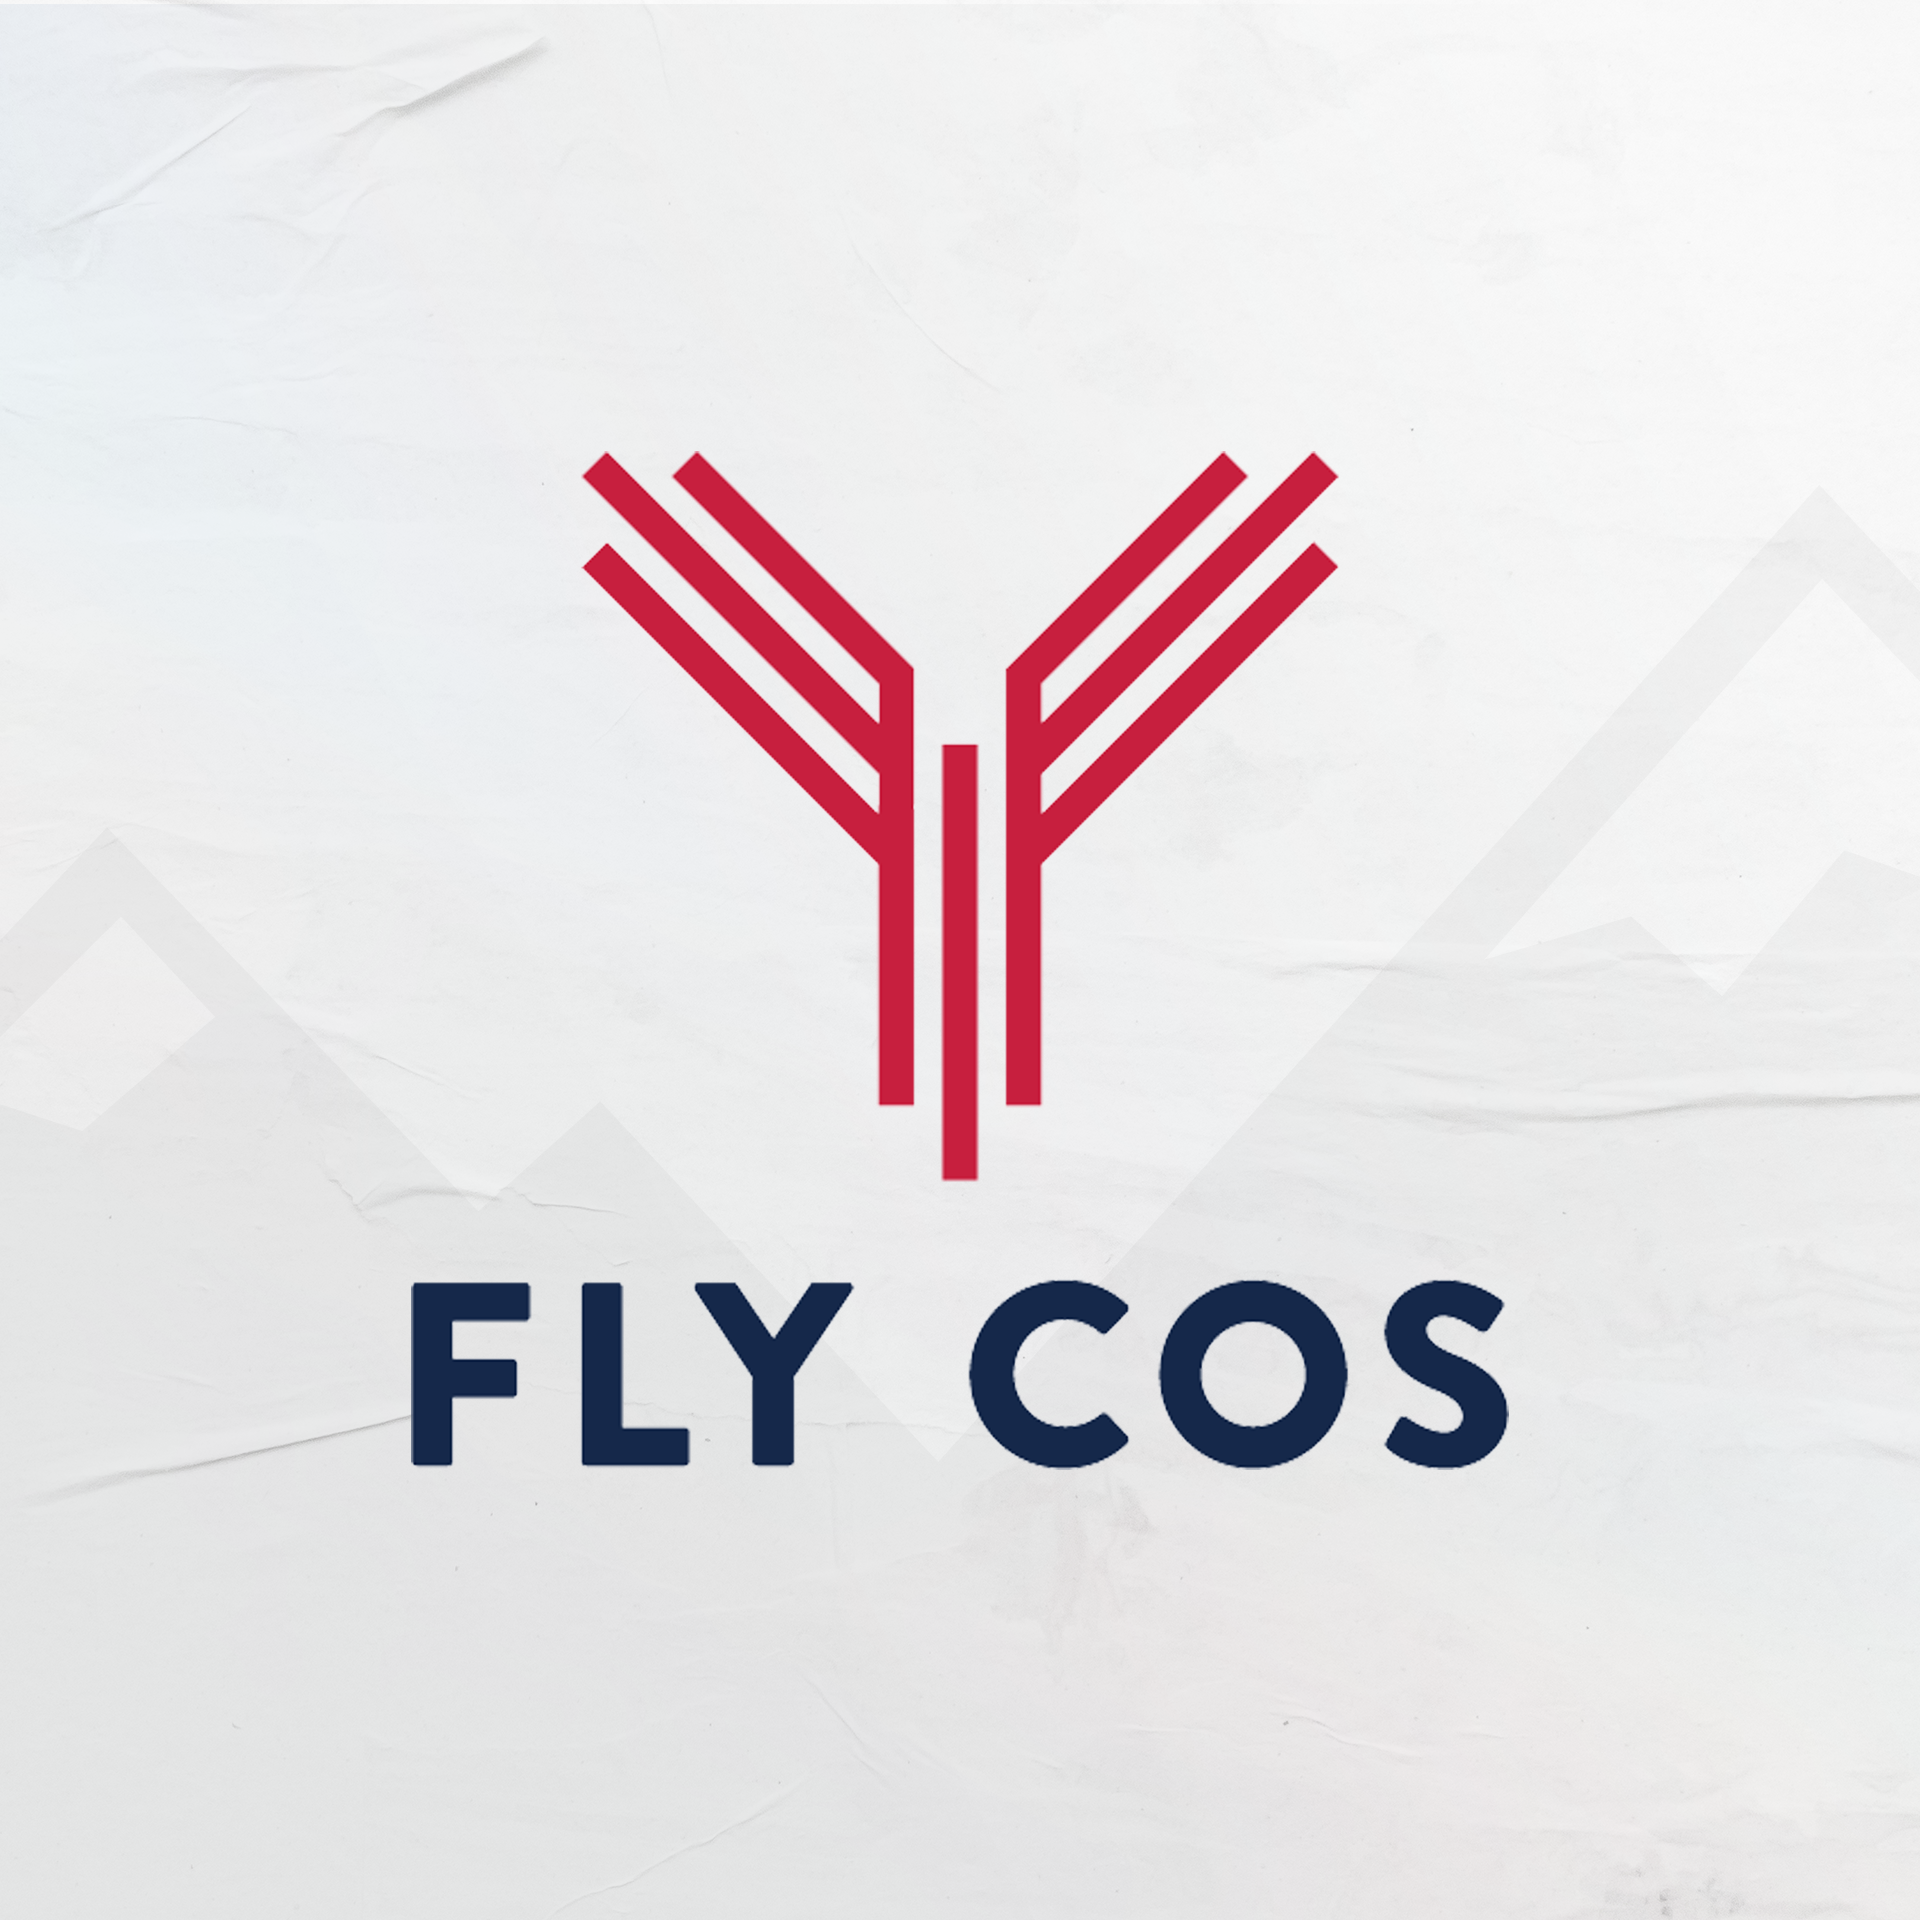 FLYCOS.png